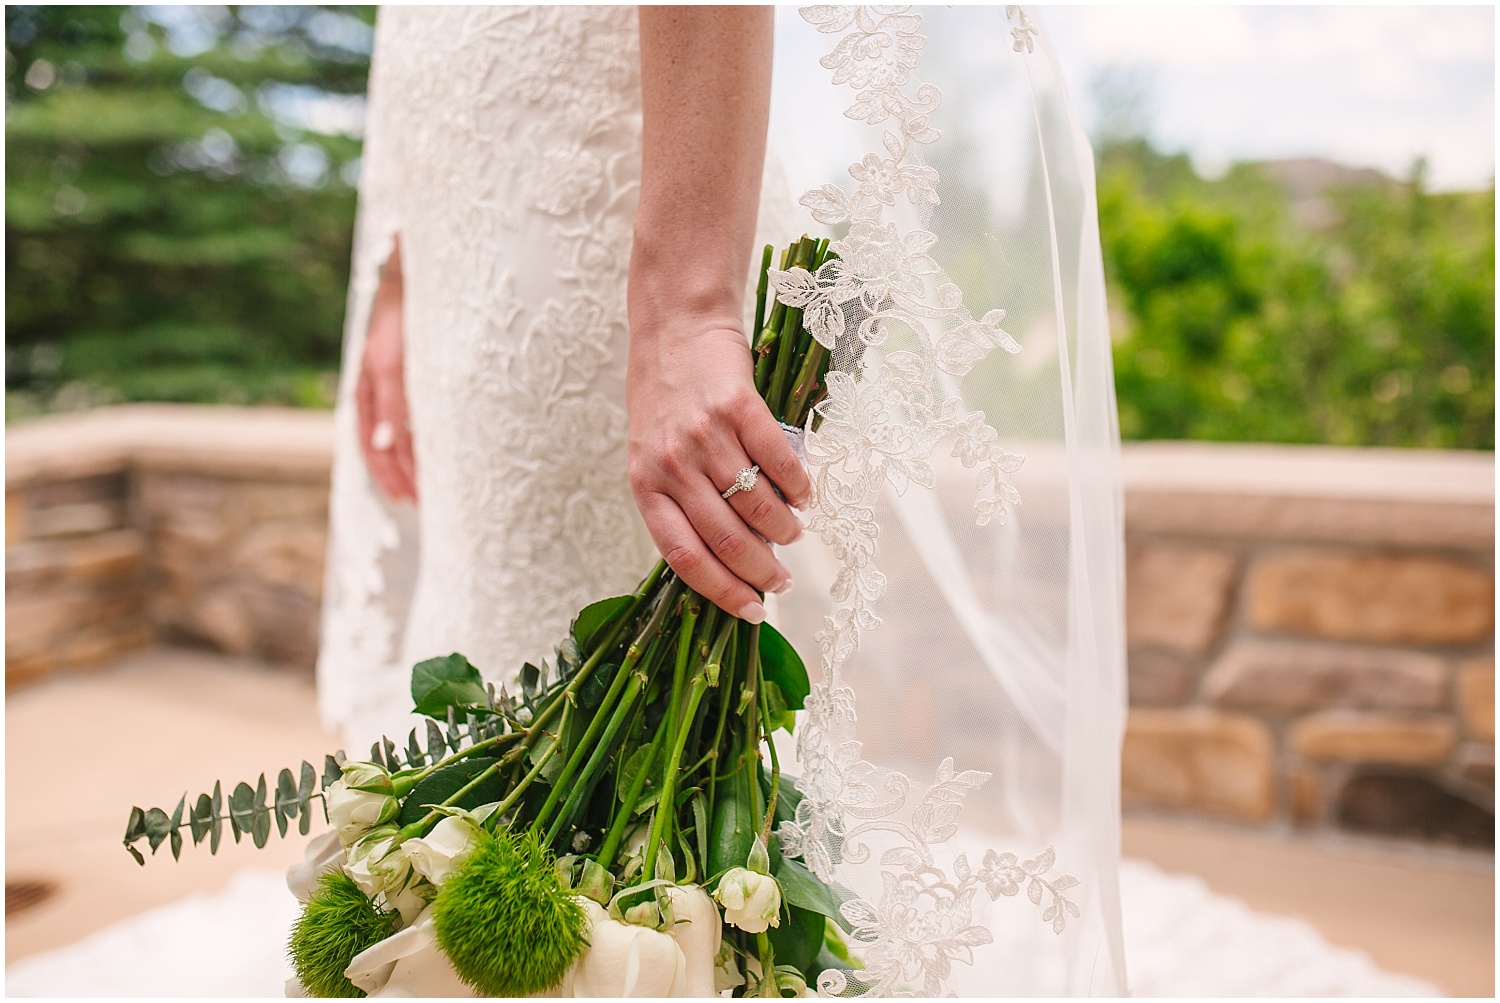 Bridal bouquet of white roses and natural greenery